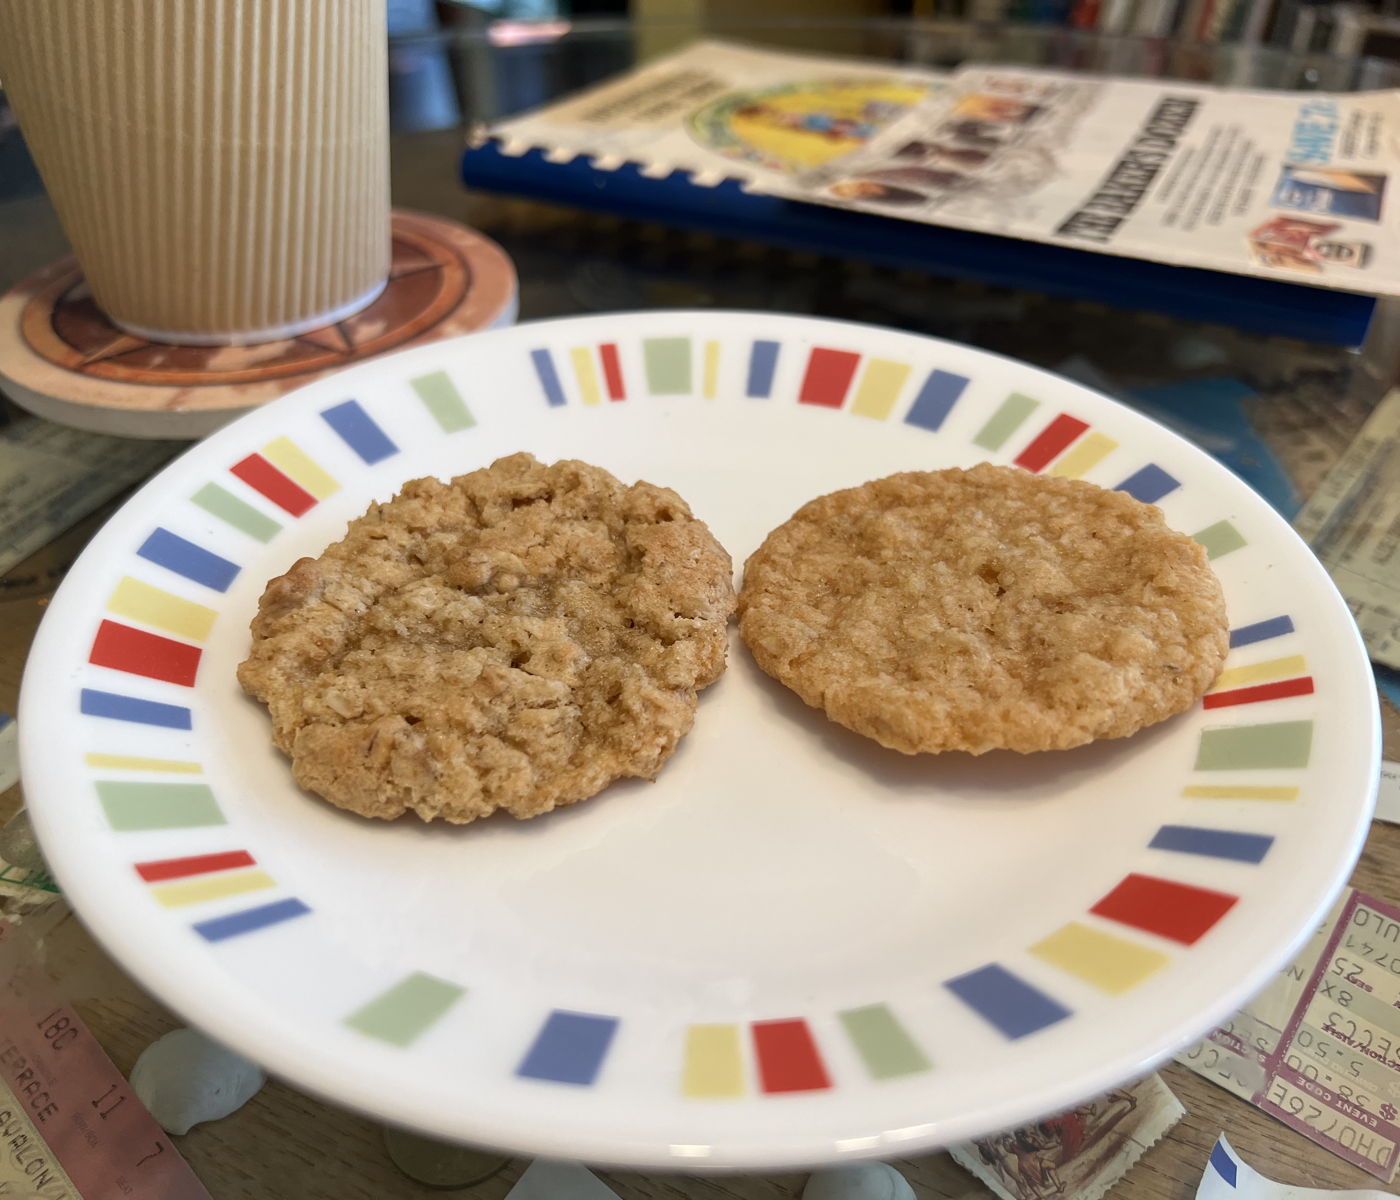 Fruitport and Baker’s coconut oatmeal cookies compared: Comparing the Fruitport and the Baker’s Dozen versions of the Coconut Oatmeal Cookies.; cookies; oatmeal; coconut; Fruitport, Michigan; Baker’s Coconut